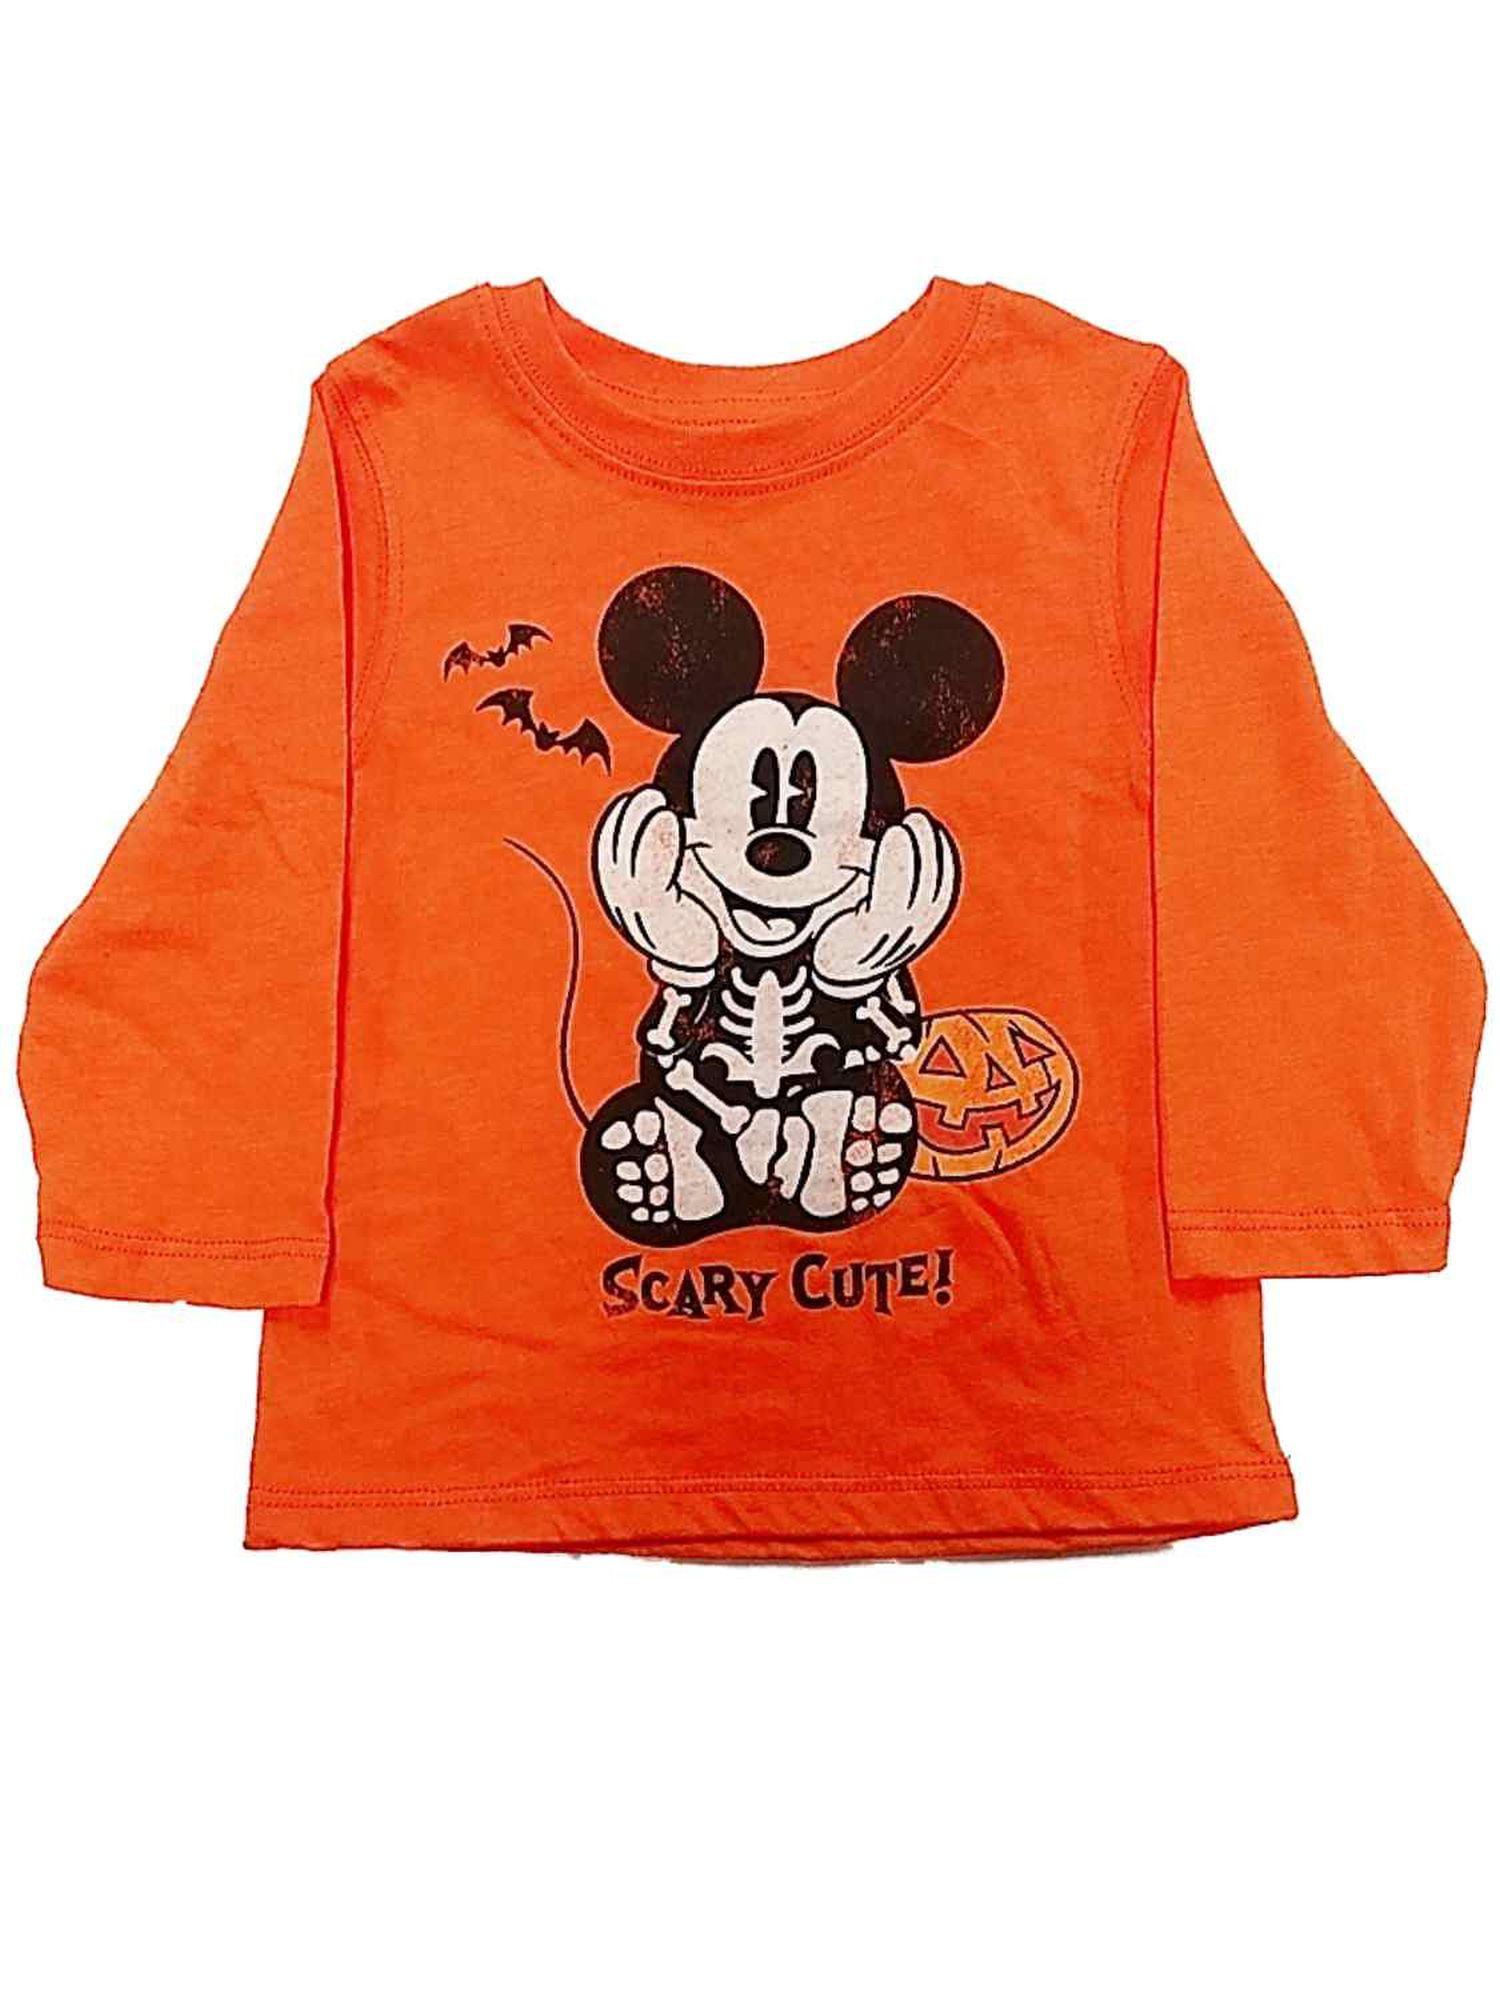 Boys' Toddler Halloween Shirts Mickey Mouse Vampire Trick Or Treat NWT 